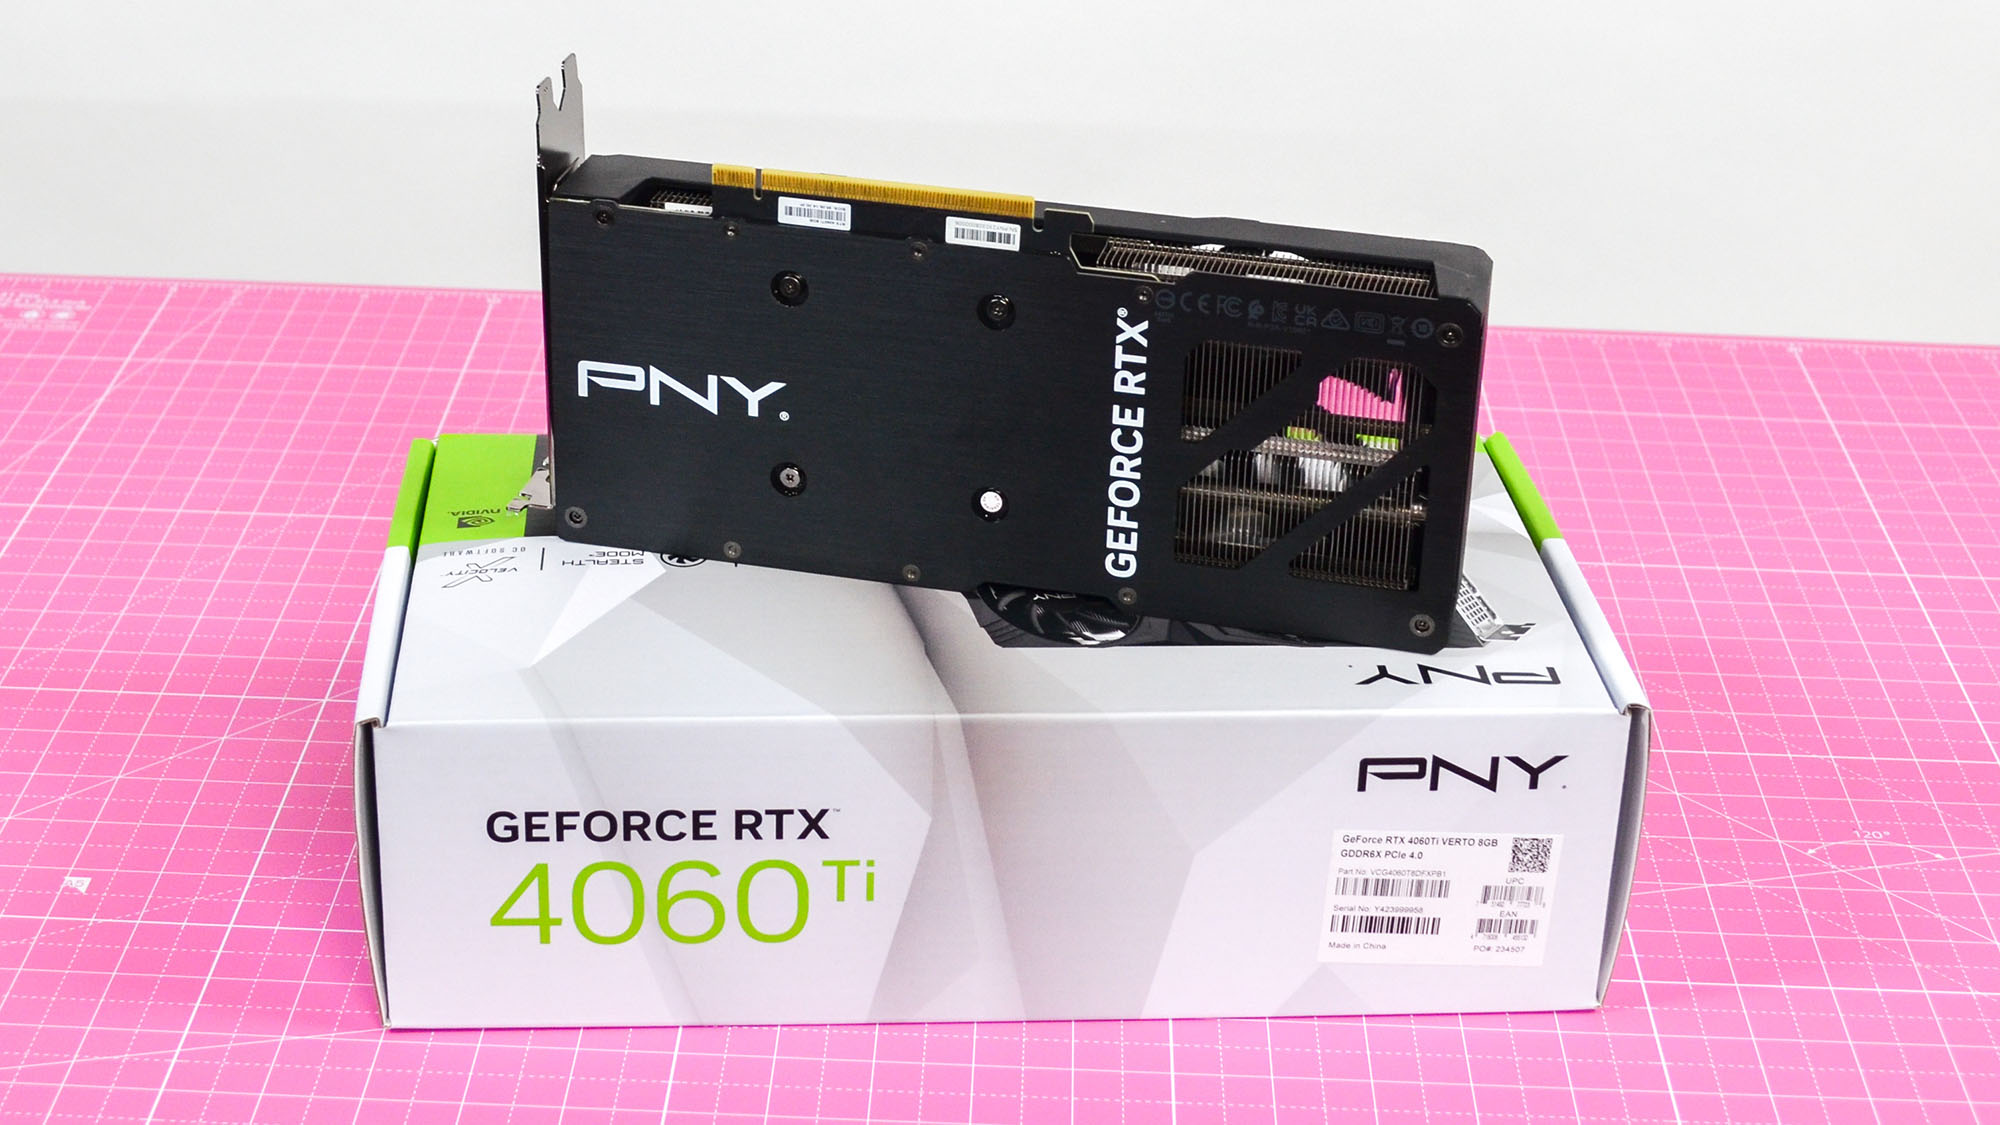 A PNY GeForce RTX 4060 Ti on a desk with a pink desk mat.